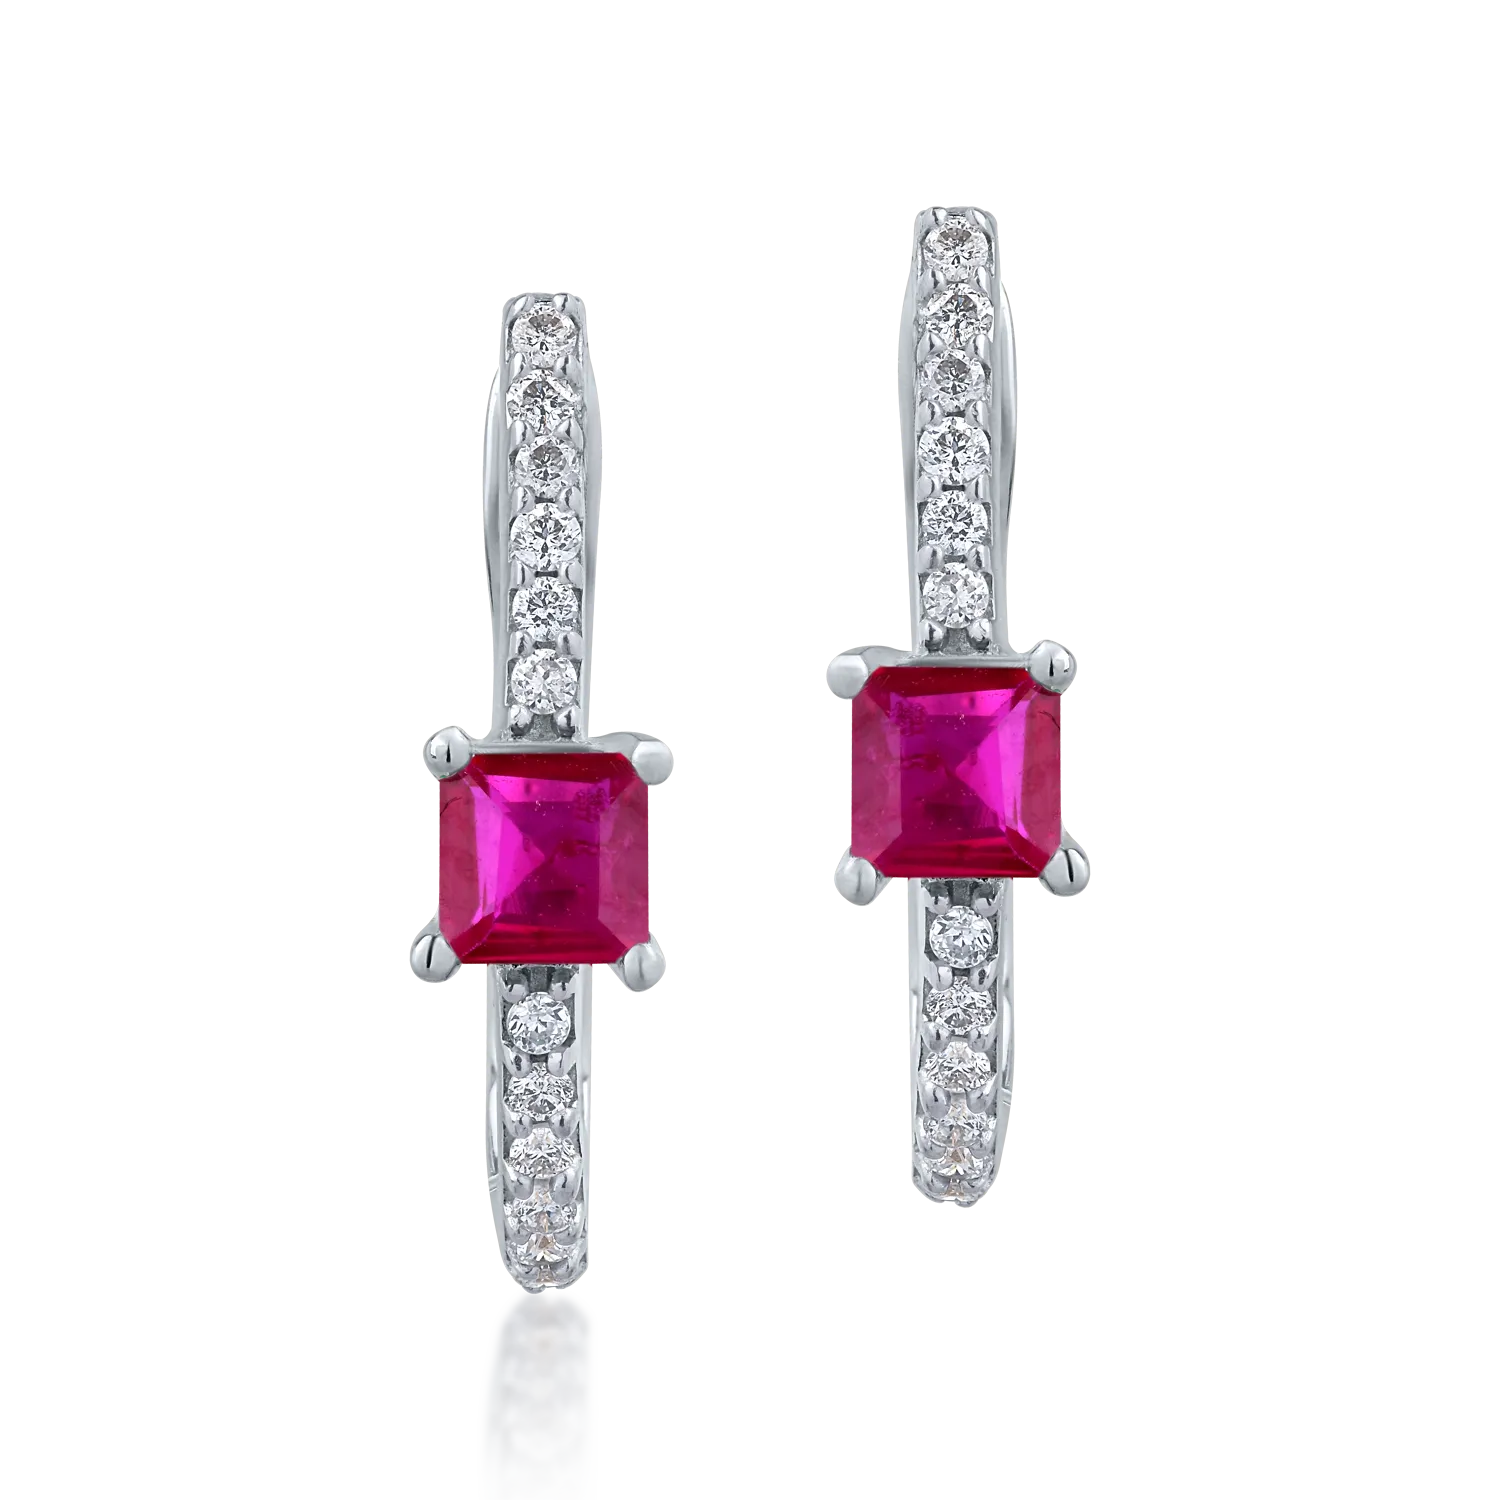 14K white gold earrings with 0.504ct rubies and 0.129ct diamonds